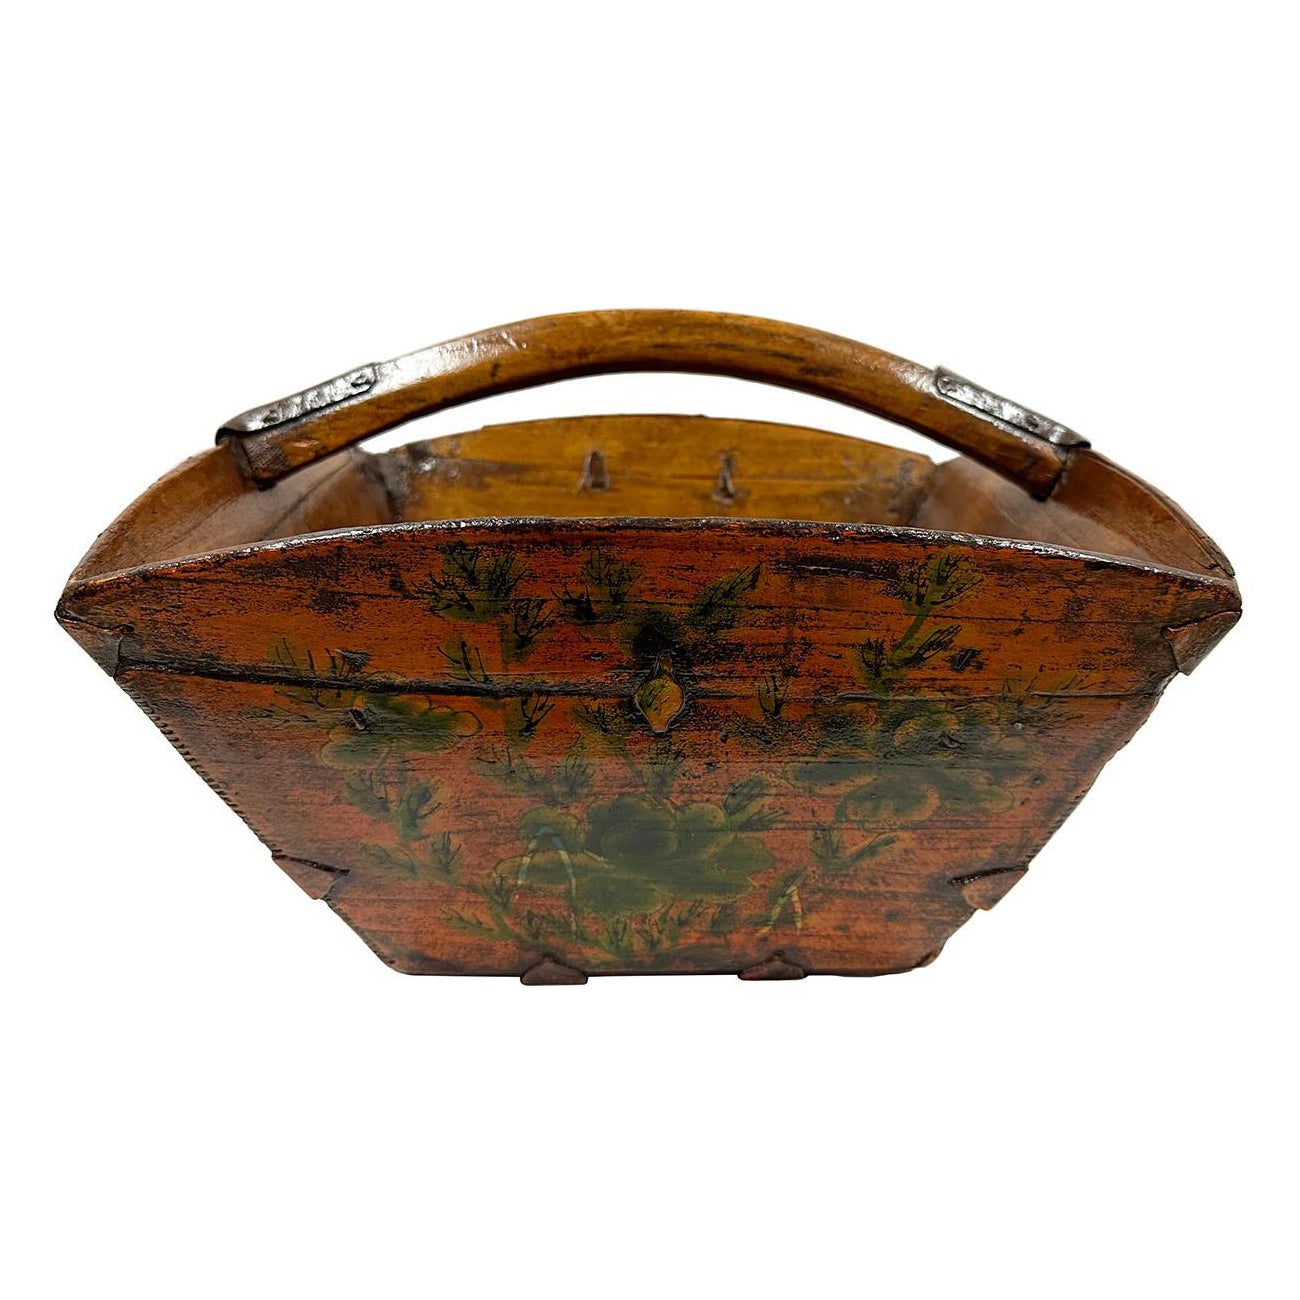 19th Century Antique Chinese Wooden Rice Measure Bucket